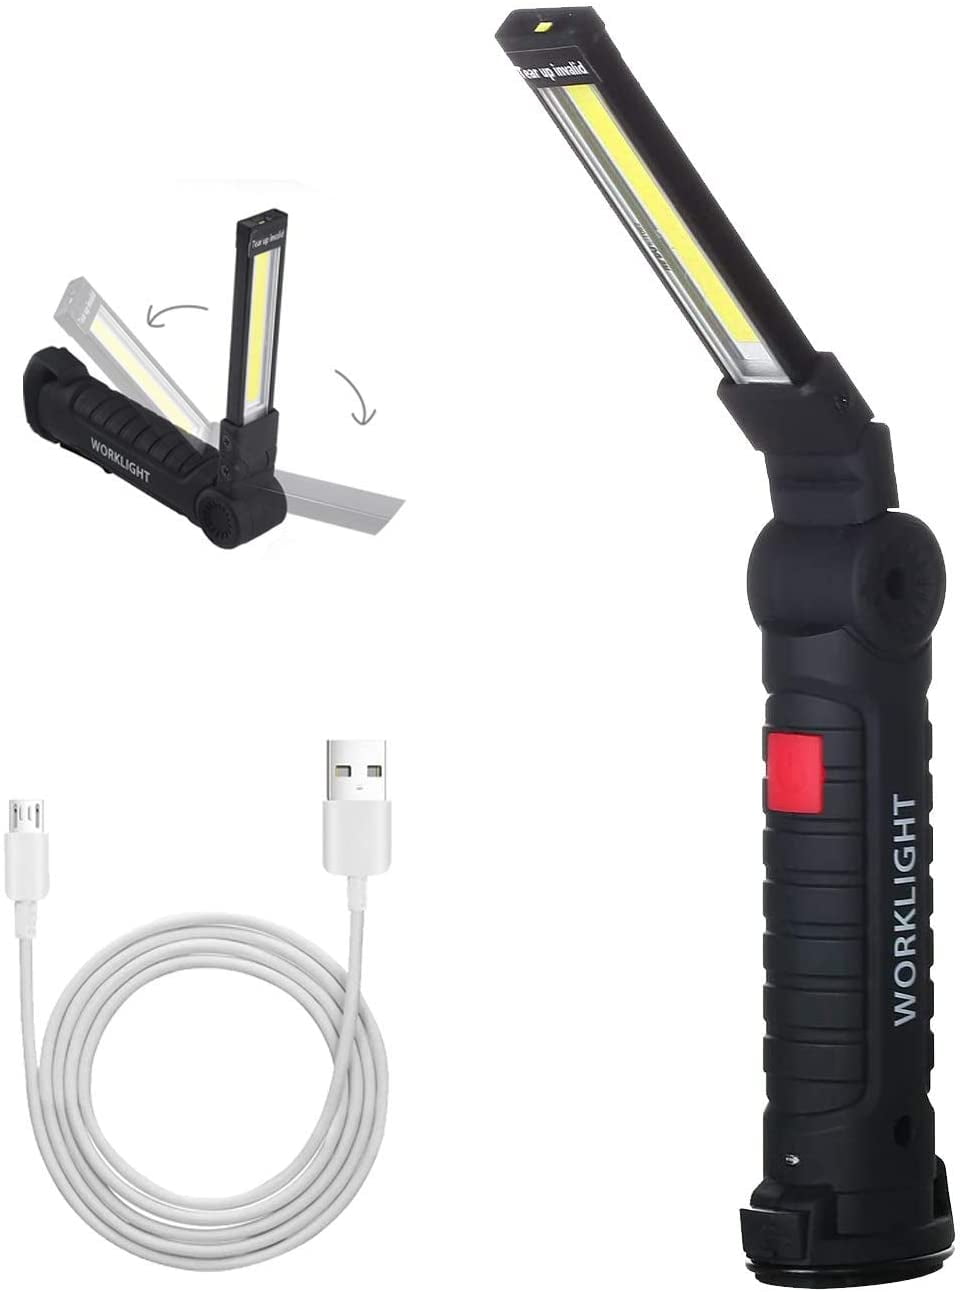 72 LED HANGING MAGNETIC WORK LIGHT INSPECTION WORKLIGHT MAGNETIC TORCH WITH HOOK 